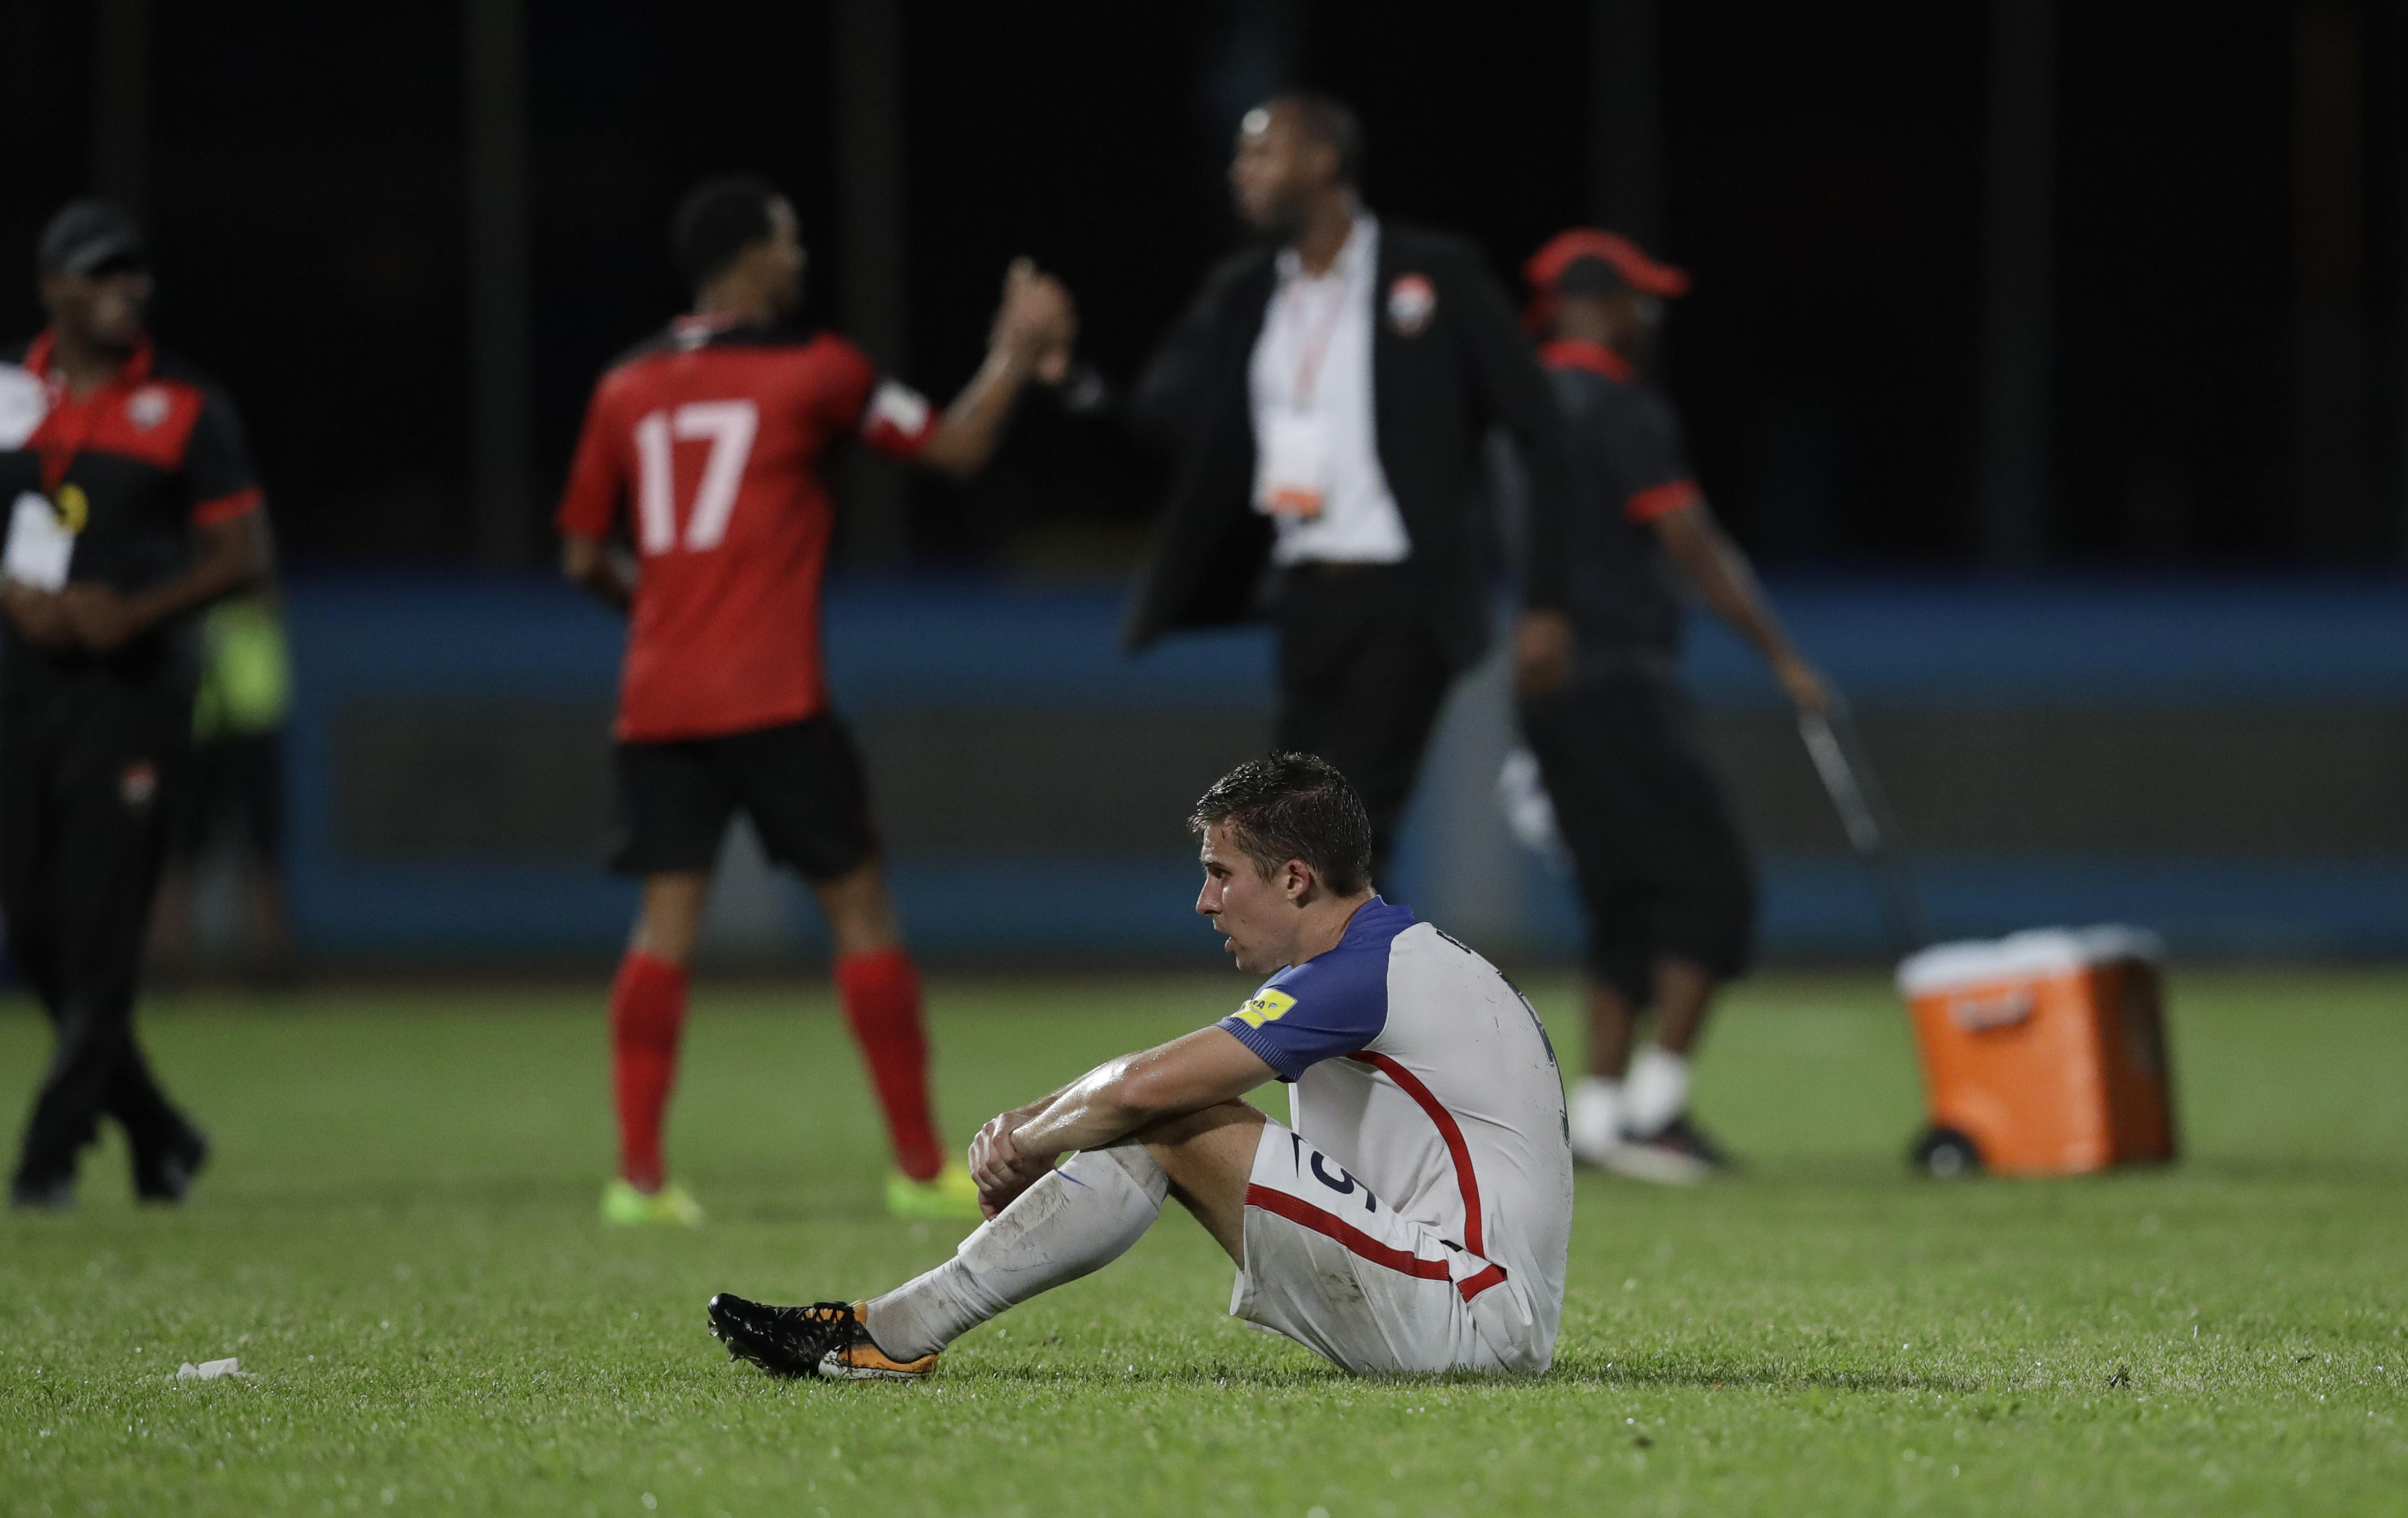 U.S. men's soccer team fails to qualify for World Cup for first time since 1986 - CBS News